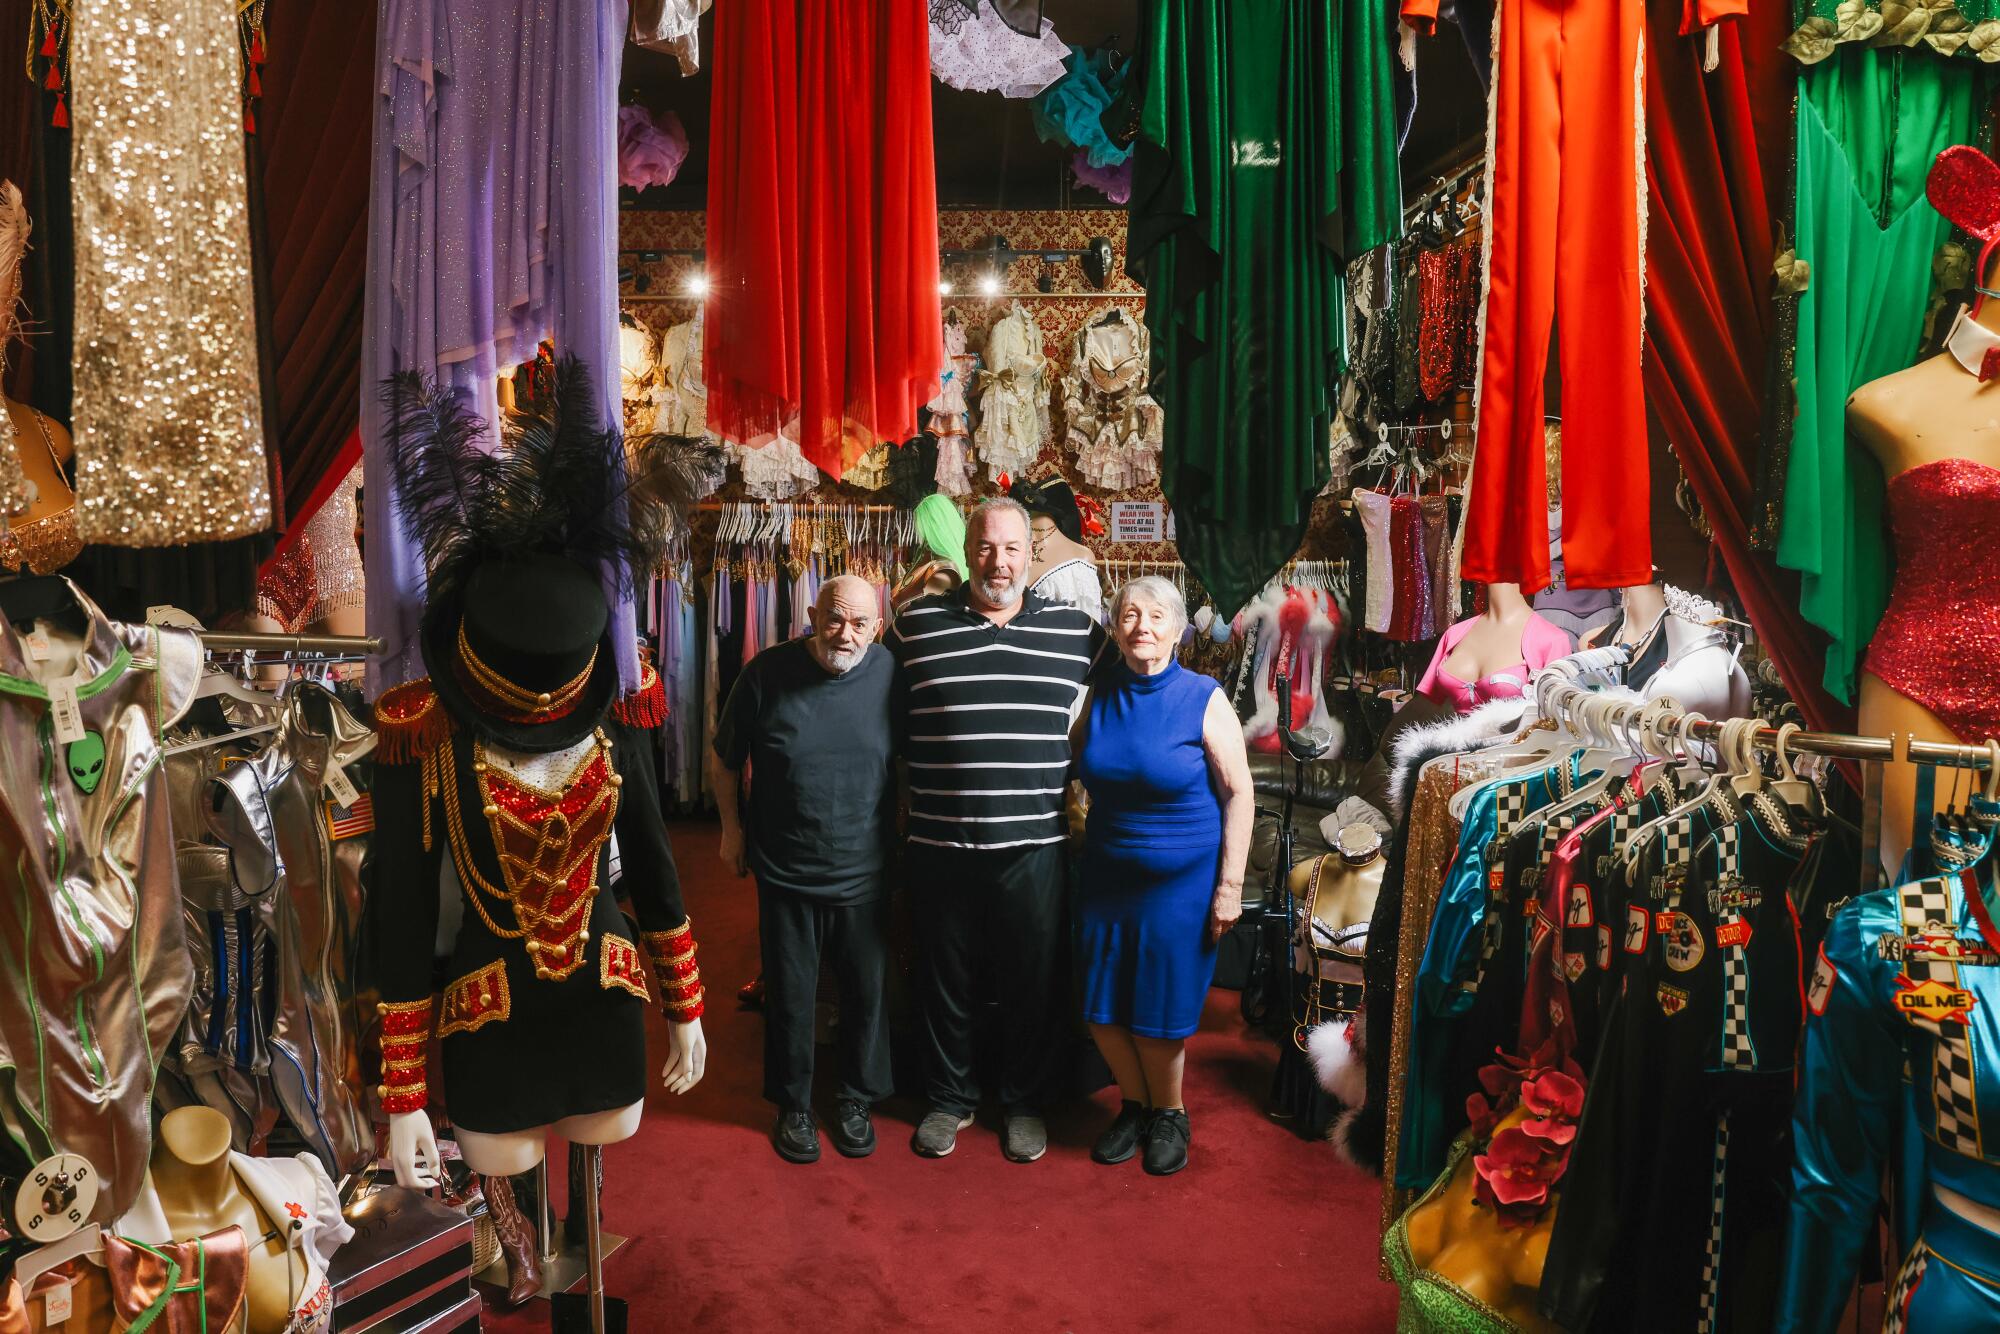 A man stands between his parents, surrounded by costumed mannequins and other items.